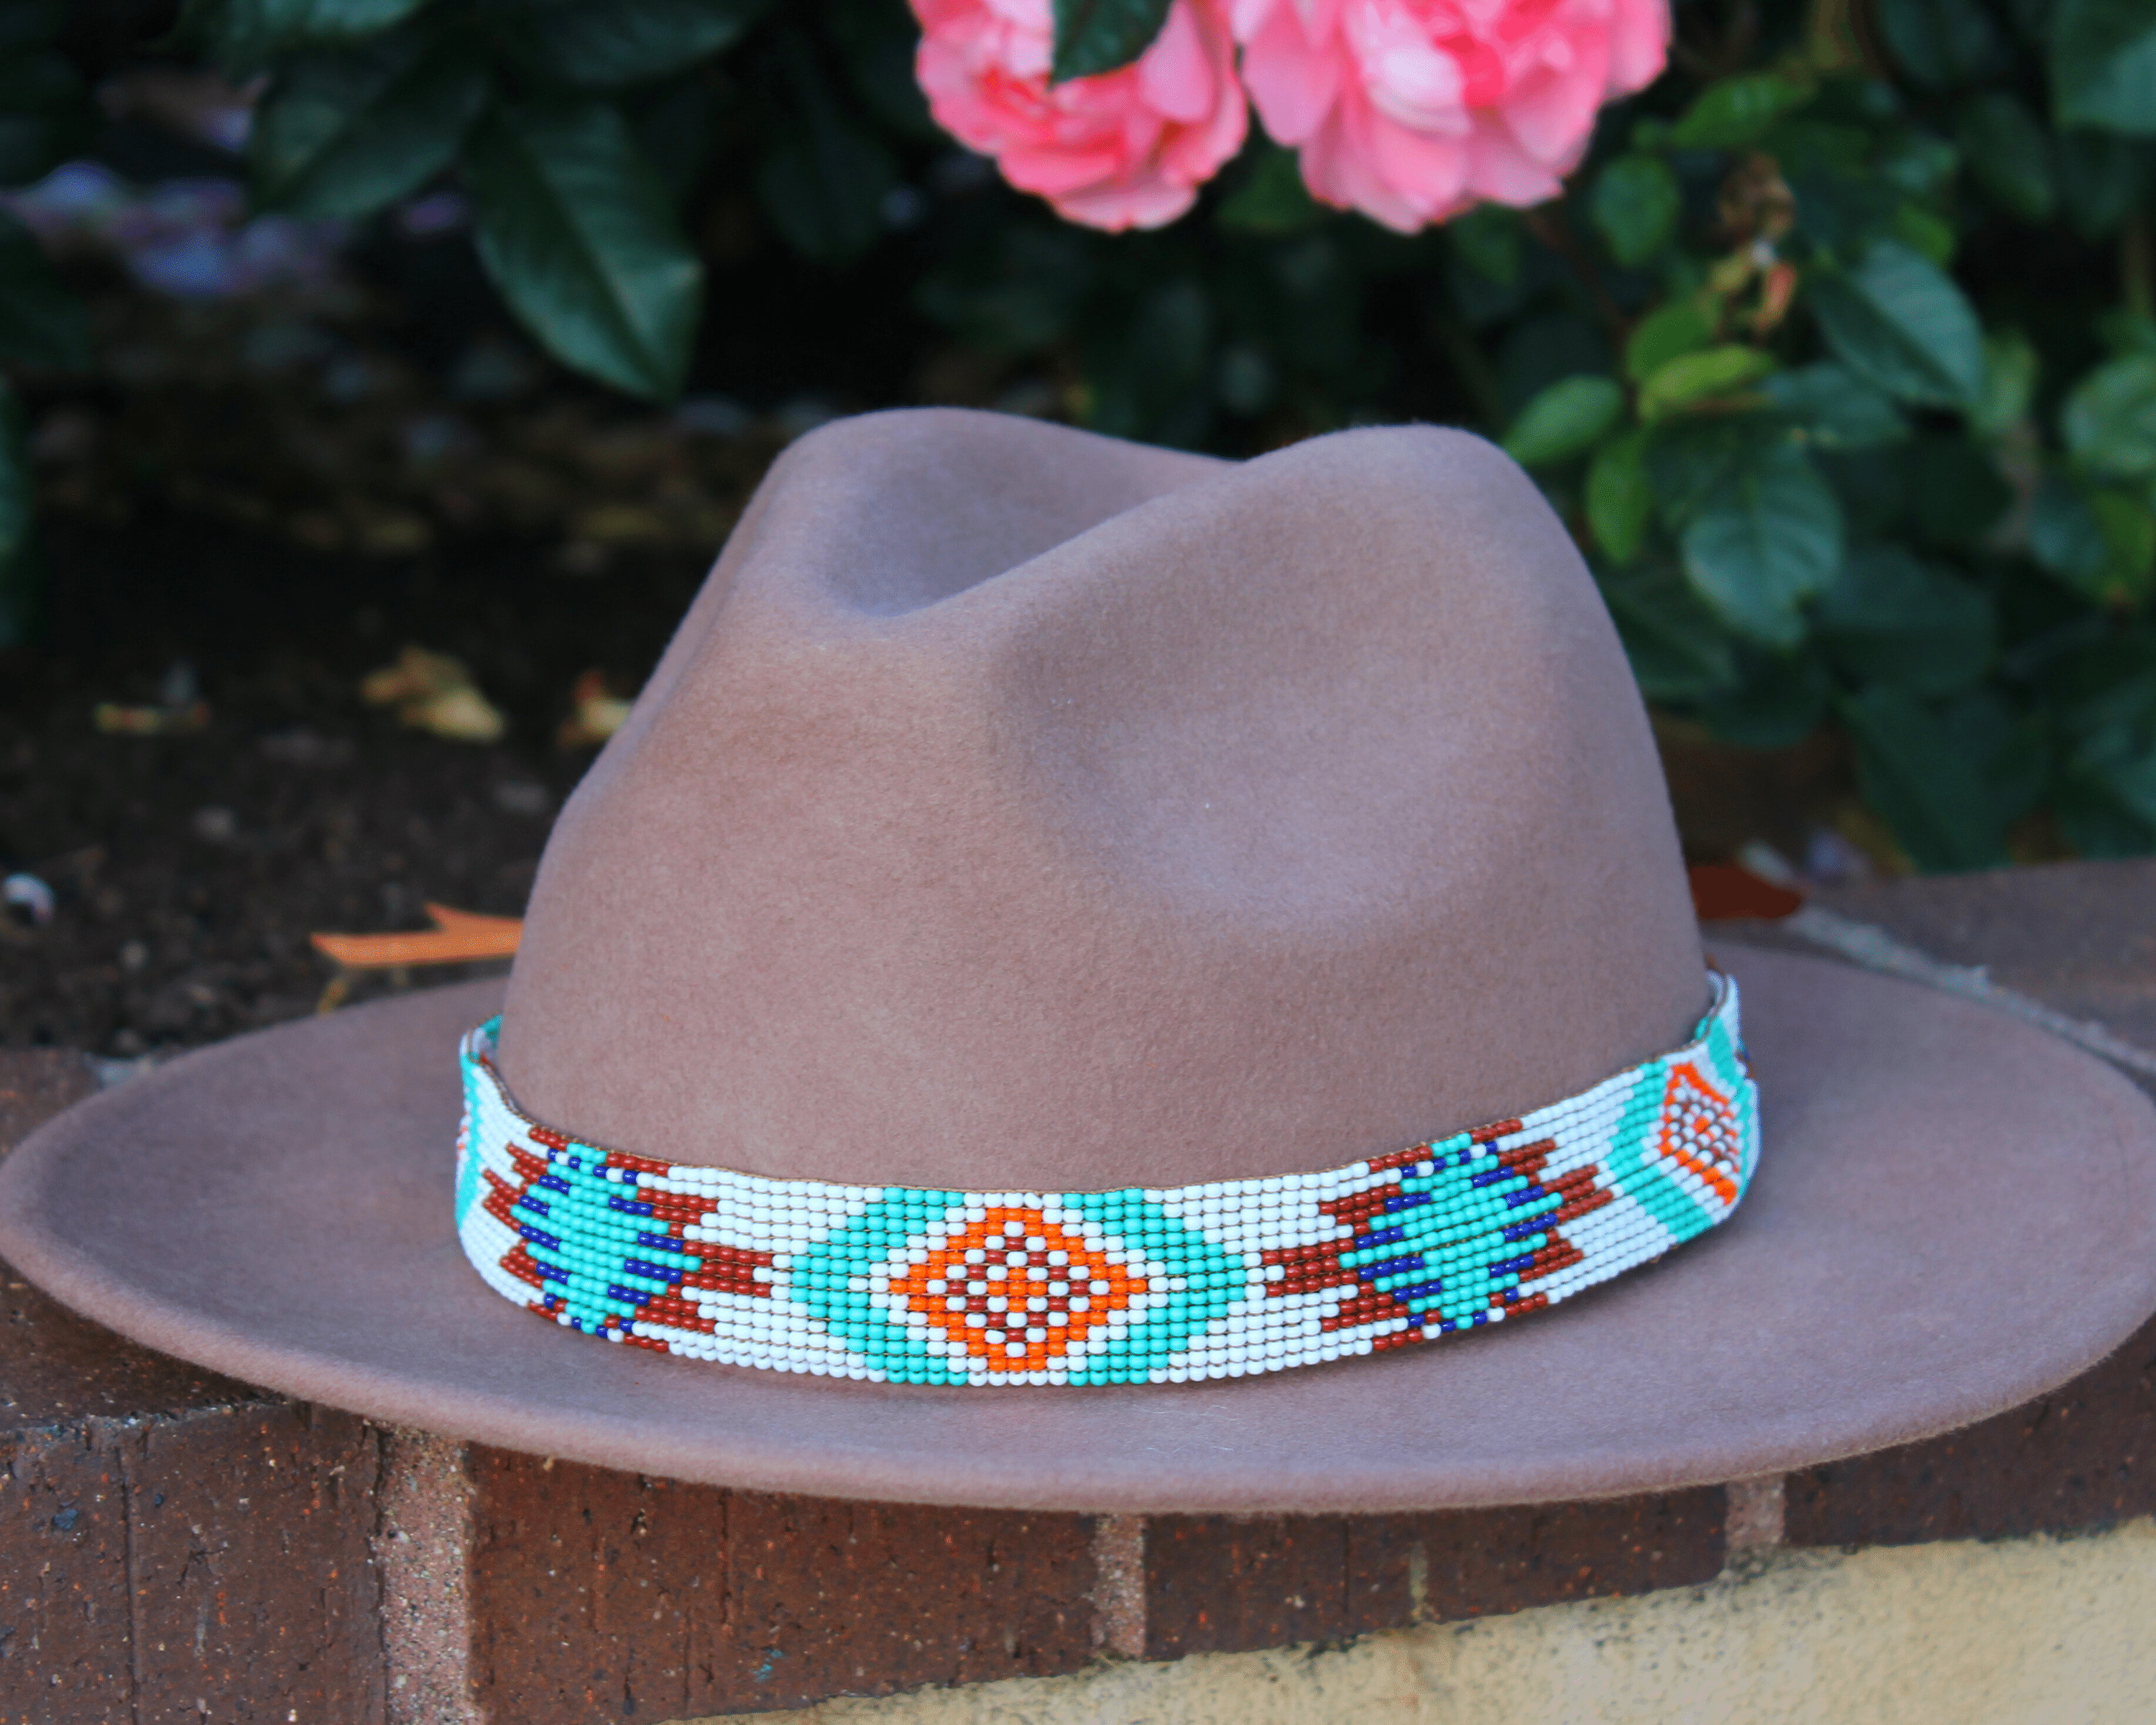 Beaded Turquoise Cowboy Hat Band, Native American Beaded Feather Cowboy Hat Band, Western Hat Band, Rodeo Fashion, Beaded Hat Band